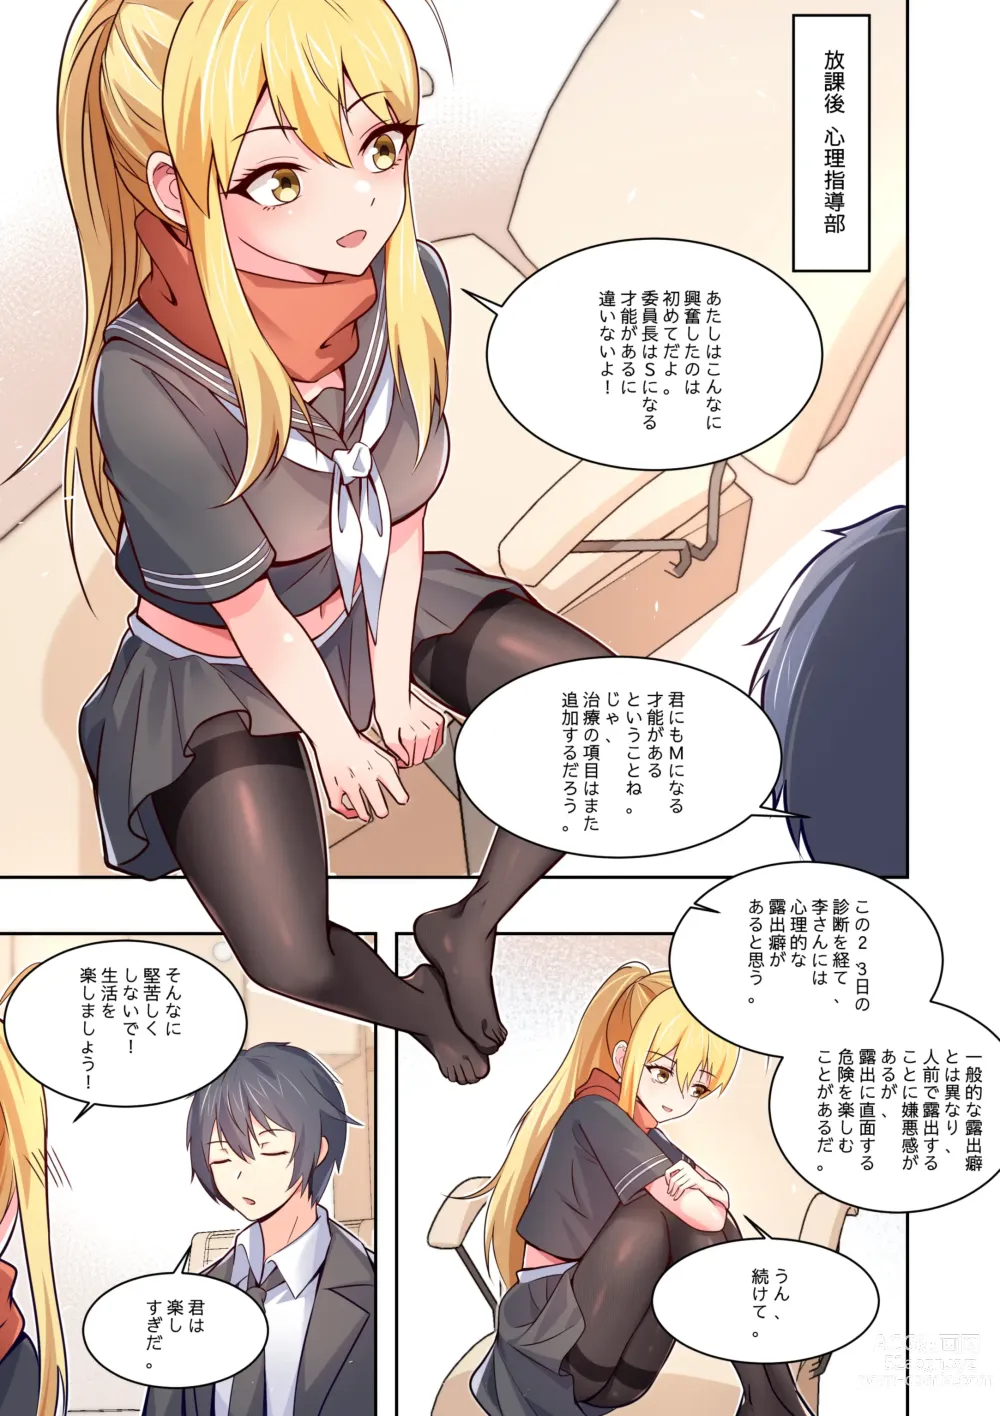 Page 27 of doujinshi ノーパン彼女